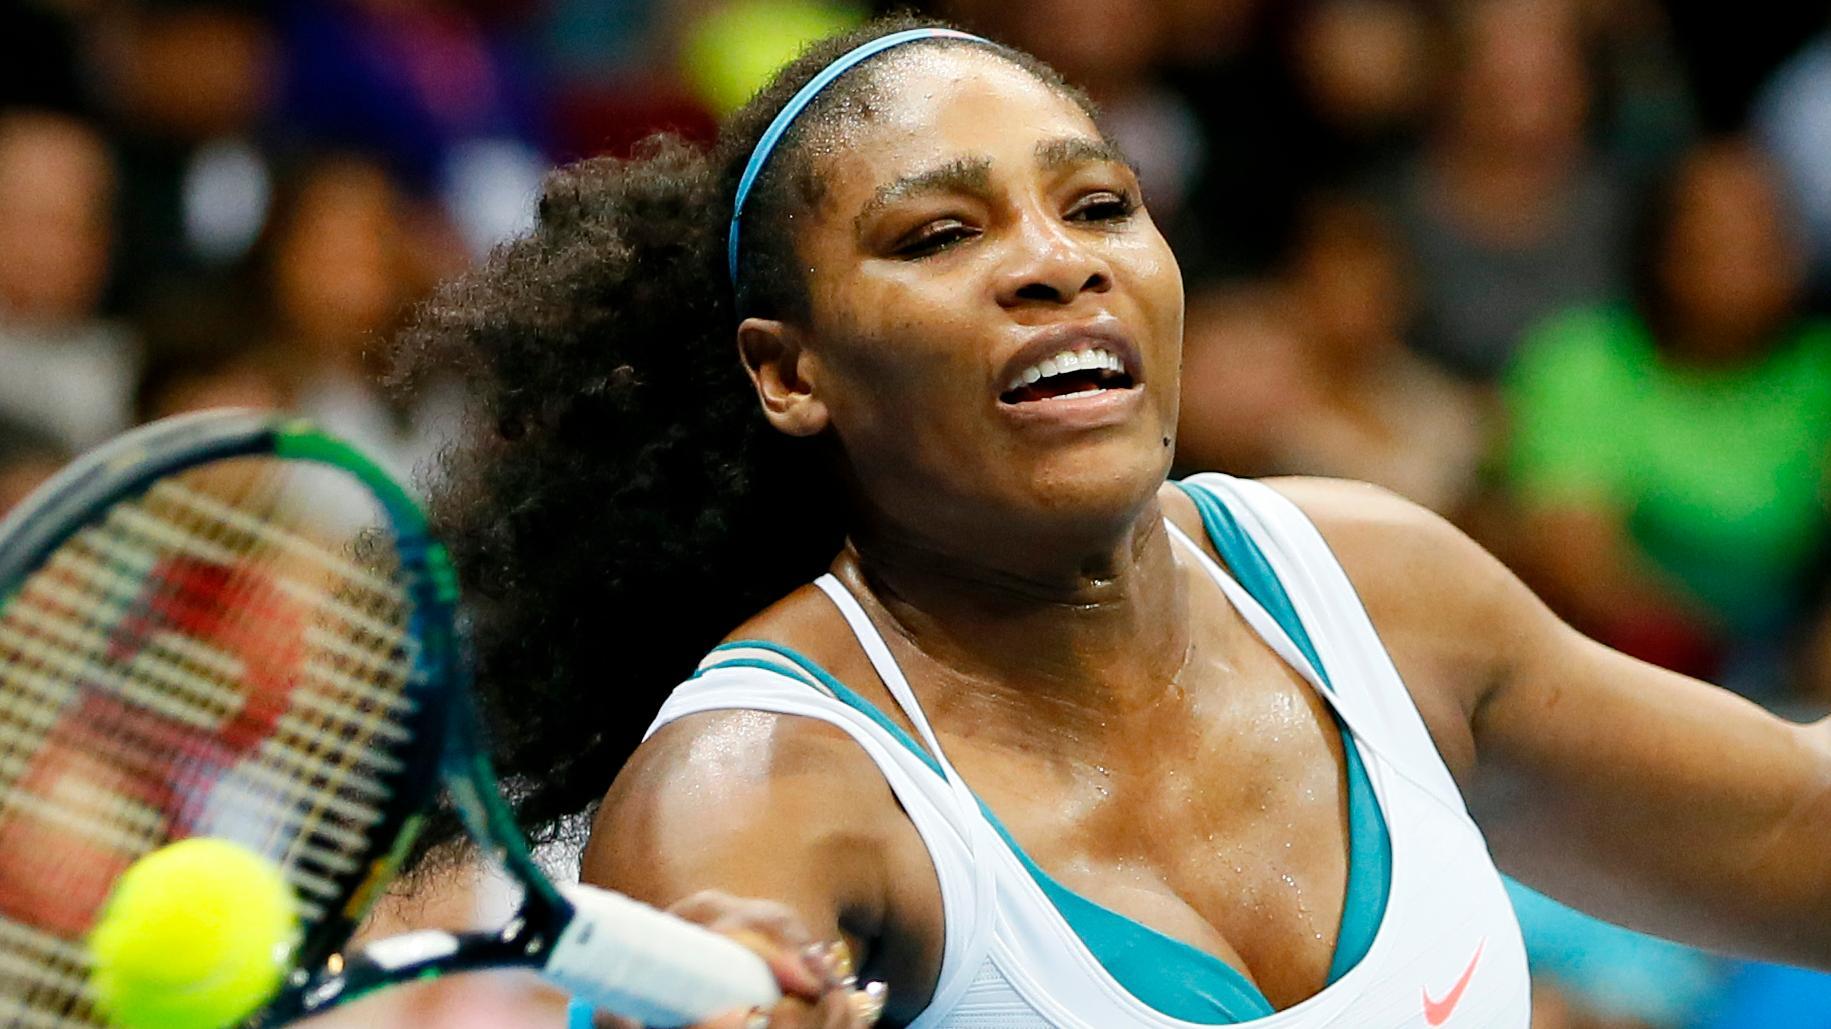 Serena Williams named Sports Illustrated Sportsperson of the Year